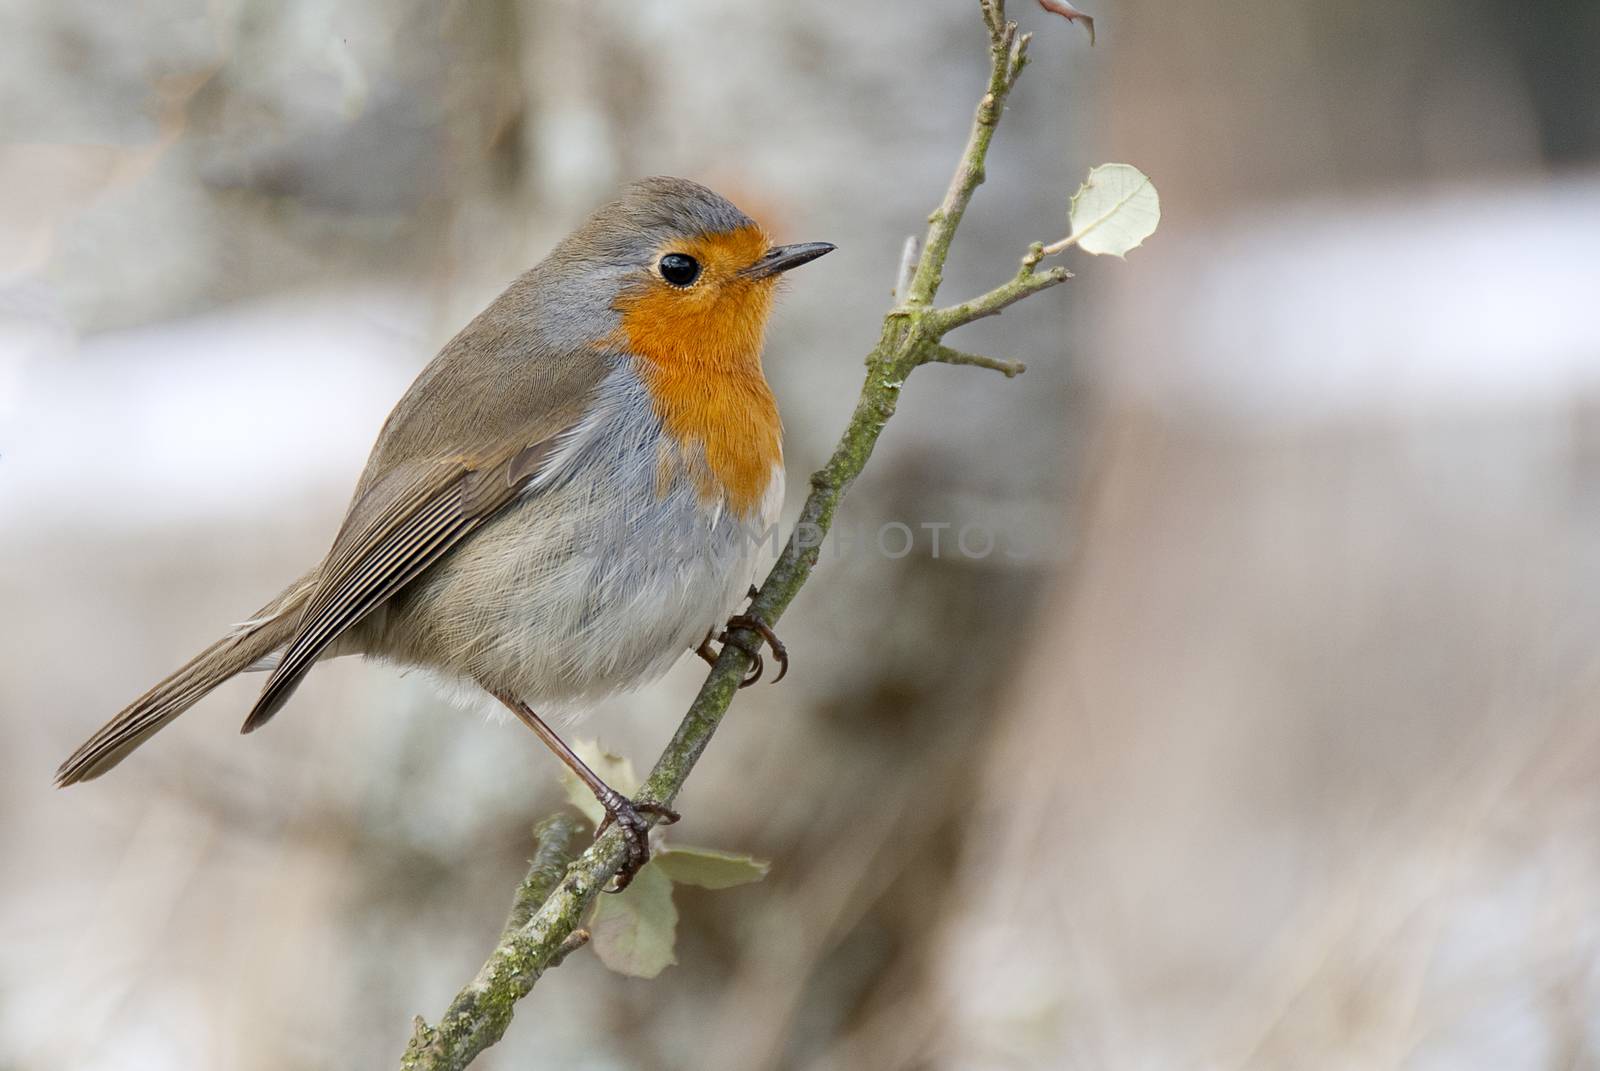 Robin - Erithacus rubecula, standing on a branch by jalonsohu@gmail.com